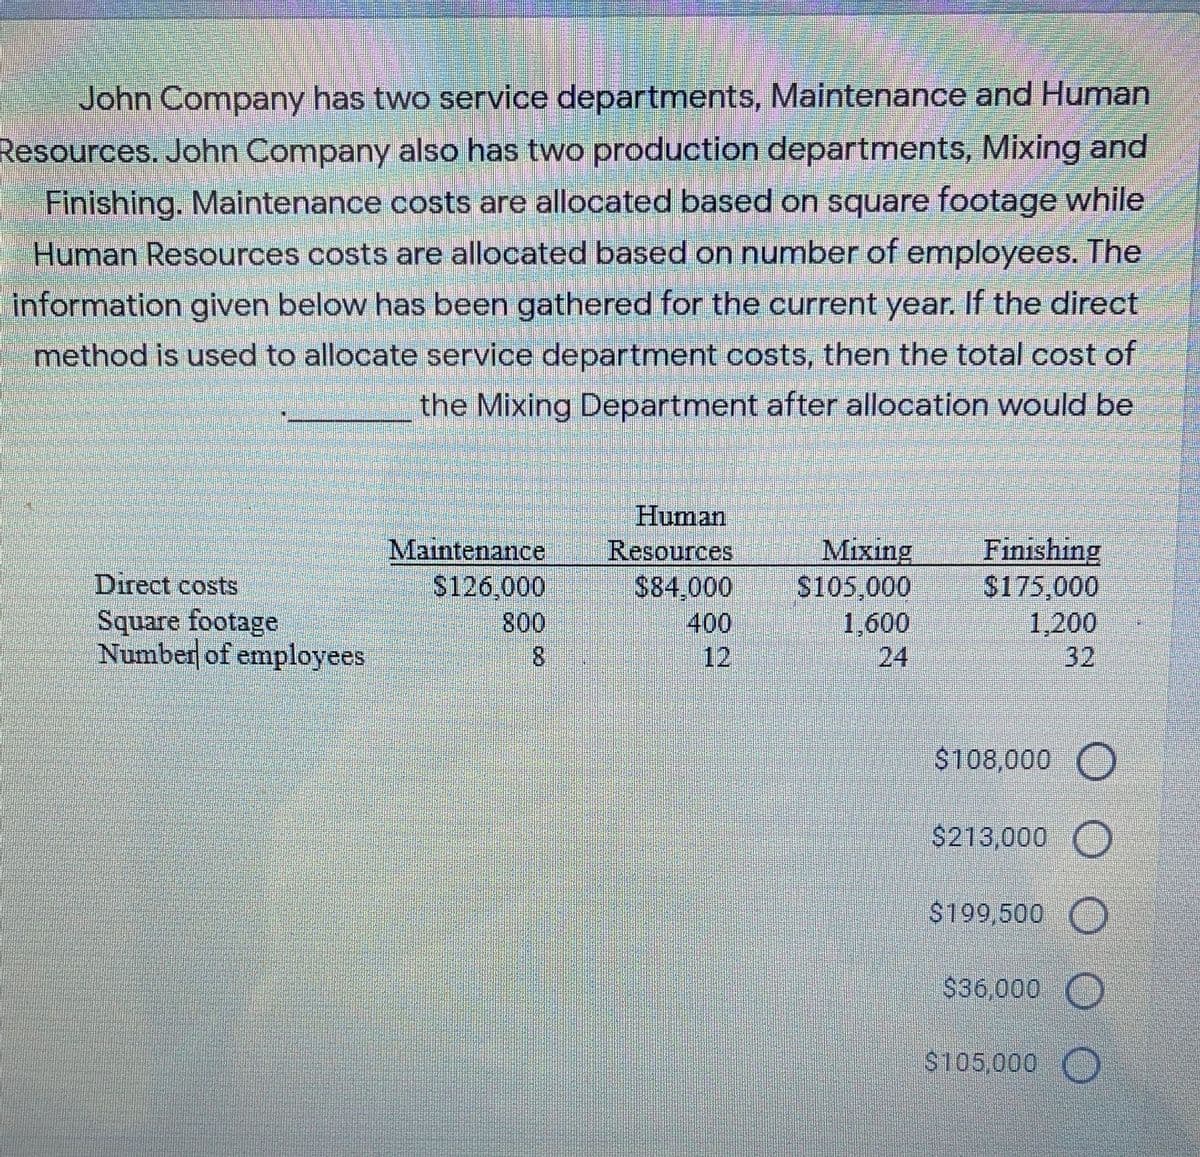 John Company has two service departments, Maintenance and Human
Resources. John Company also has two production departments, Mixing and
Finishing. Maintenance costs are allocated based on square footage while
Human Resources costs are allocated based on number of employees. The
Information given below has been gathered for the current year. If the direct
method is used to allocate service department costs, then the total cost of
the Mixing Department after allocation would be
Maintenance
$126,000
800
Human
Resources
$84,000
400
Mixing
$105,000
1,600
24
Finishing
$175,000
1,200
32
Direct costs
Square footage
Number of employees
8.
12
$108,000 O
$213,000 O
$199,500 O
$36,000
$105,000 O
